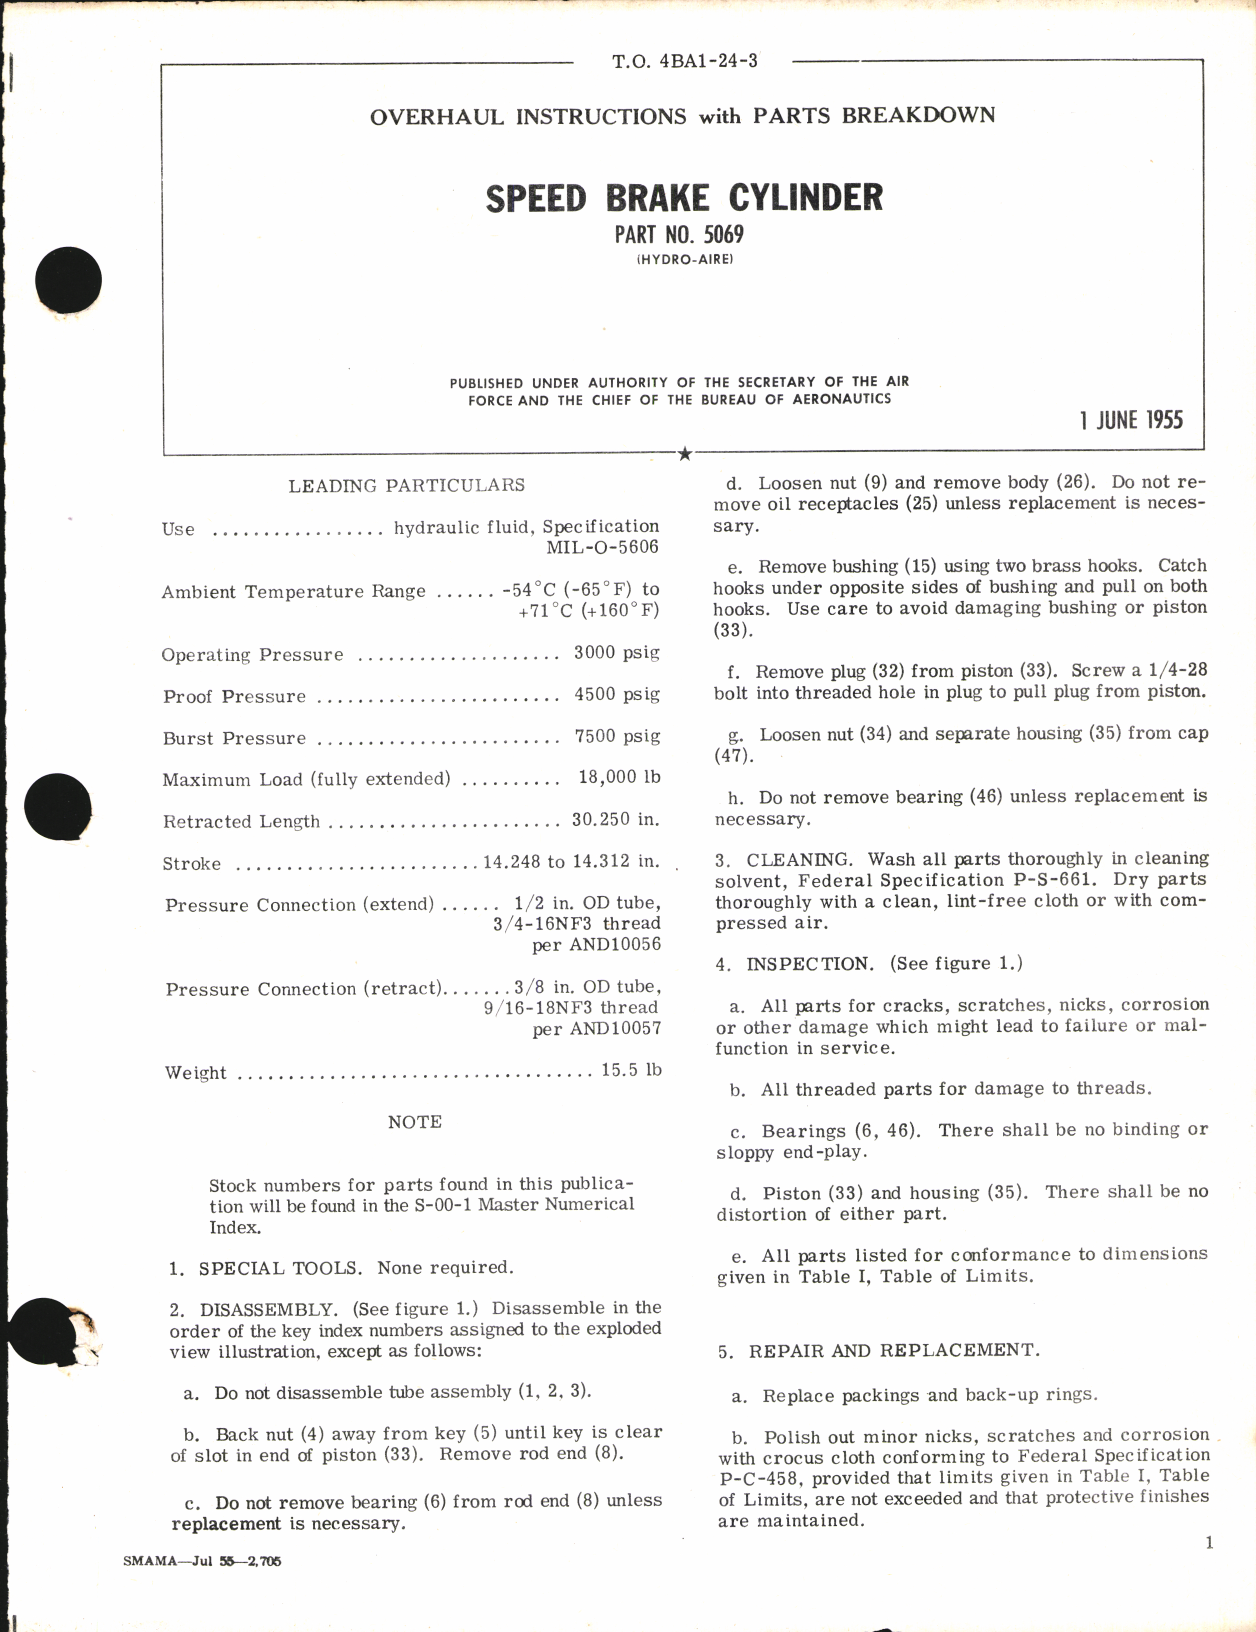 Sample page 1 from AirCorps Library document: Overhaul Instructions with Parts Breakdown for Speed Brake Cylinder